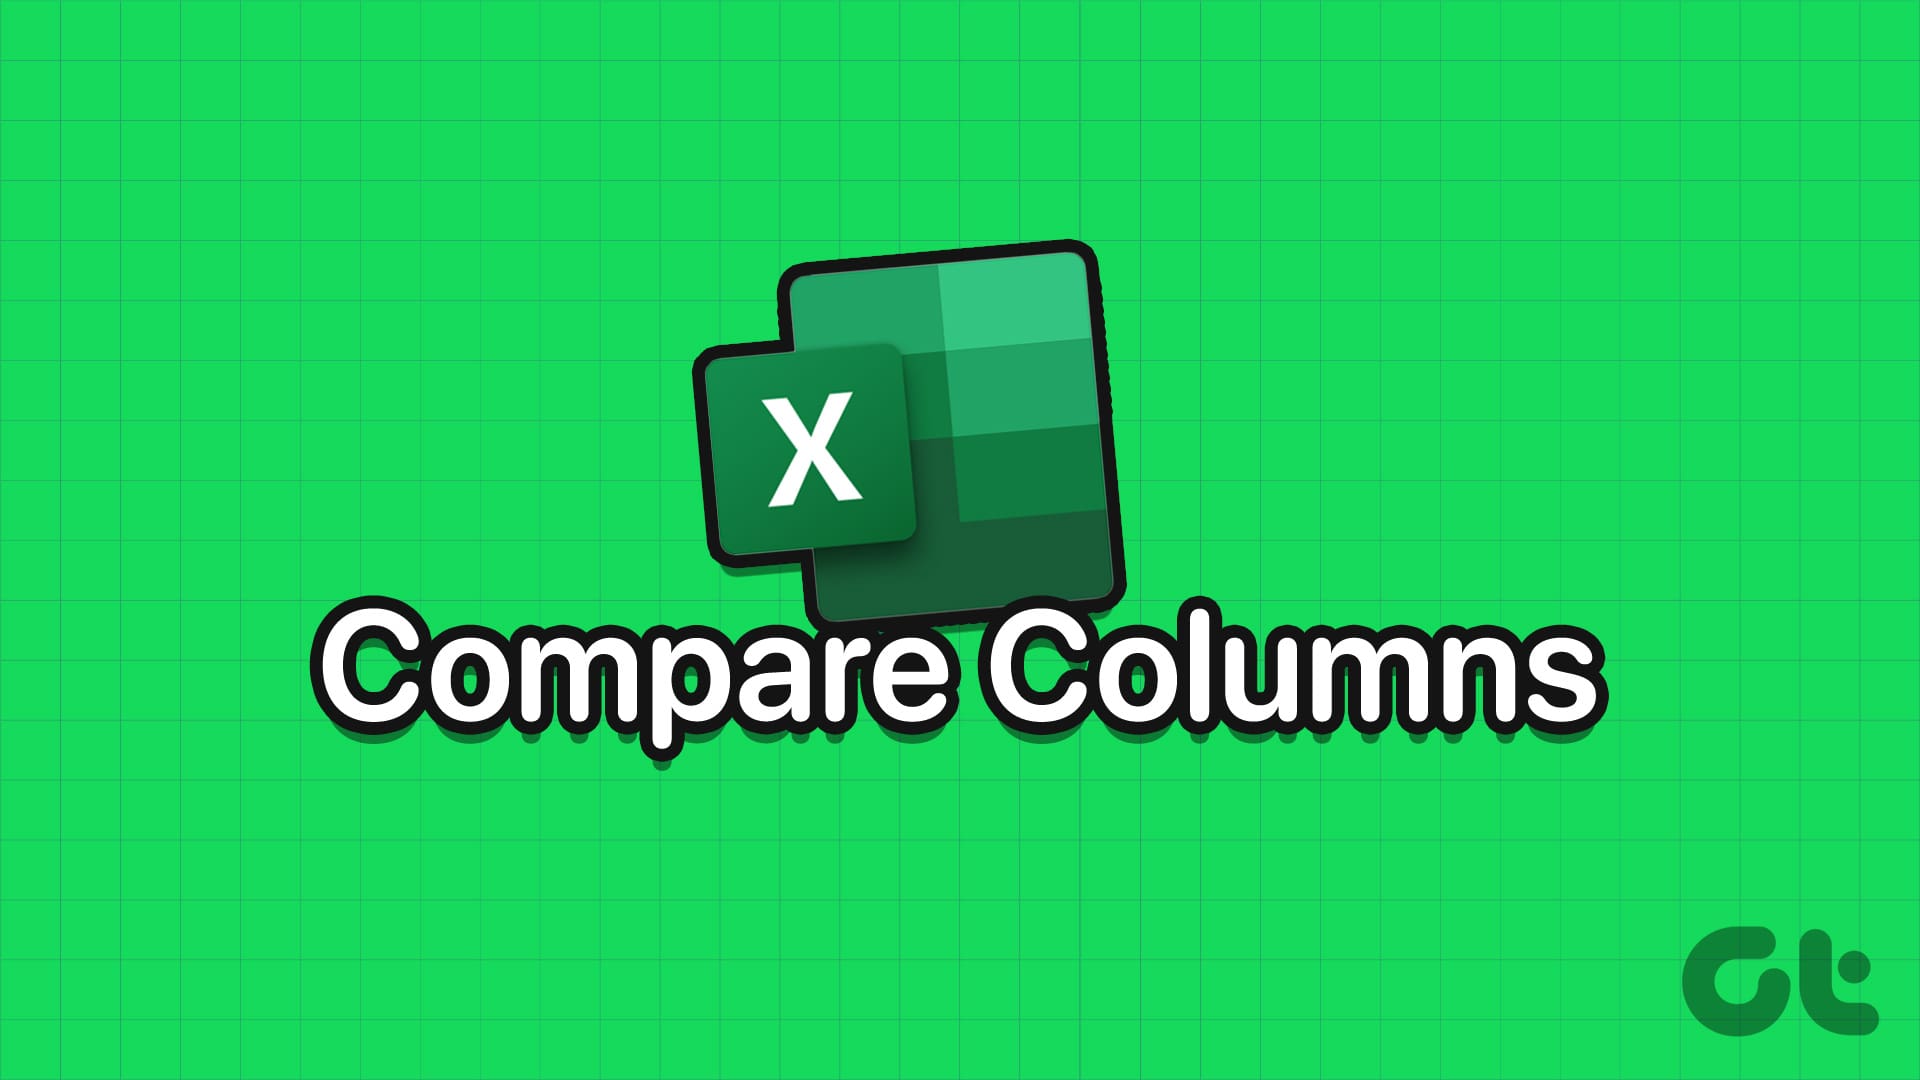 N_Ways_to_Compare_Columns_in_Excel_for_Matches 2